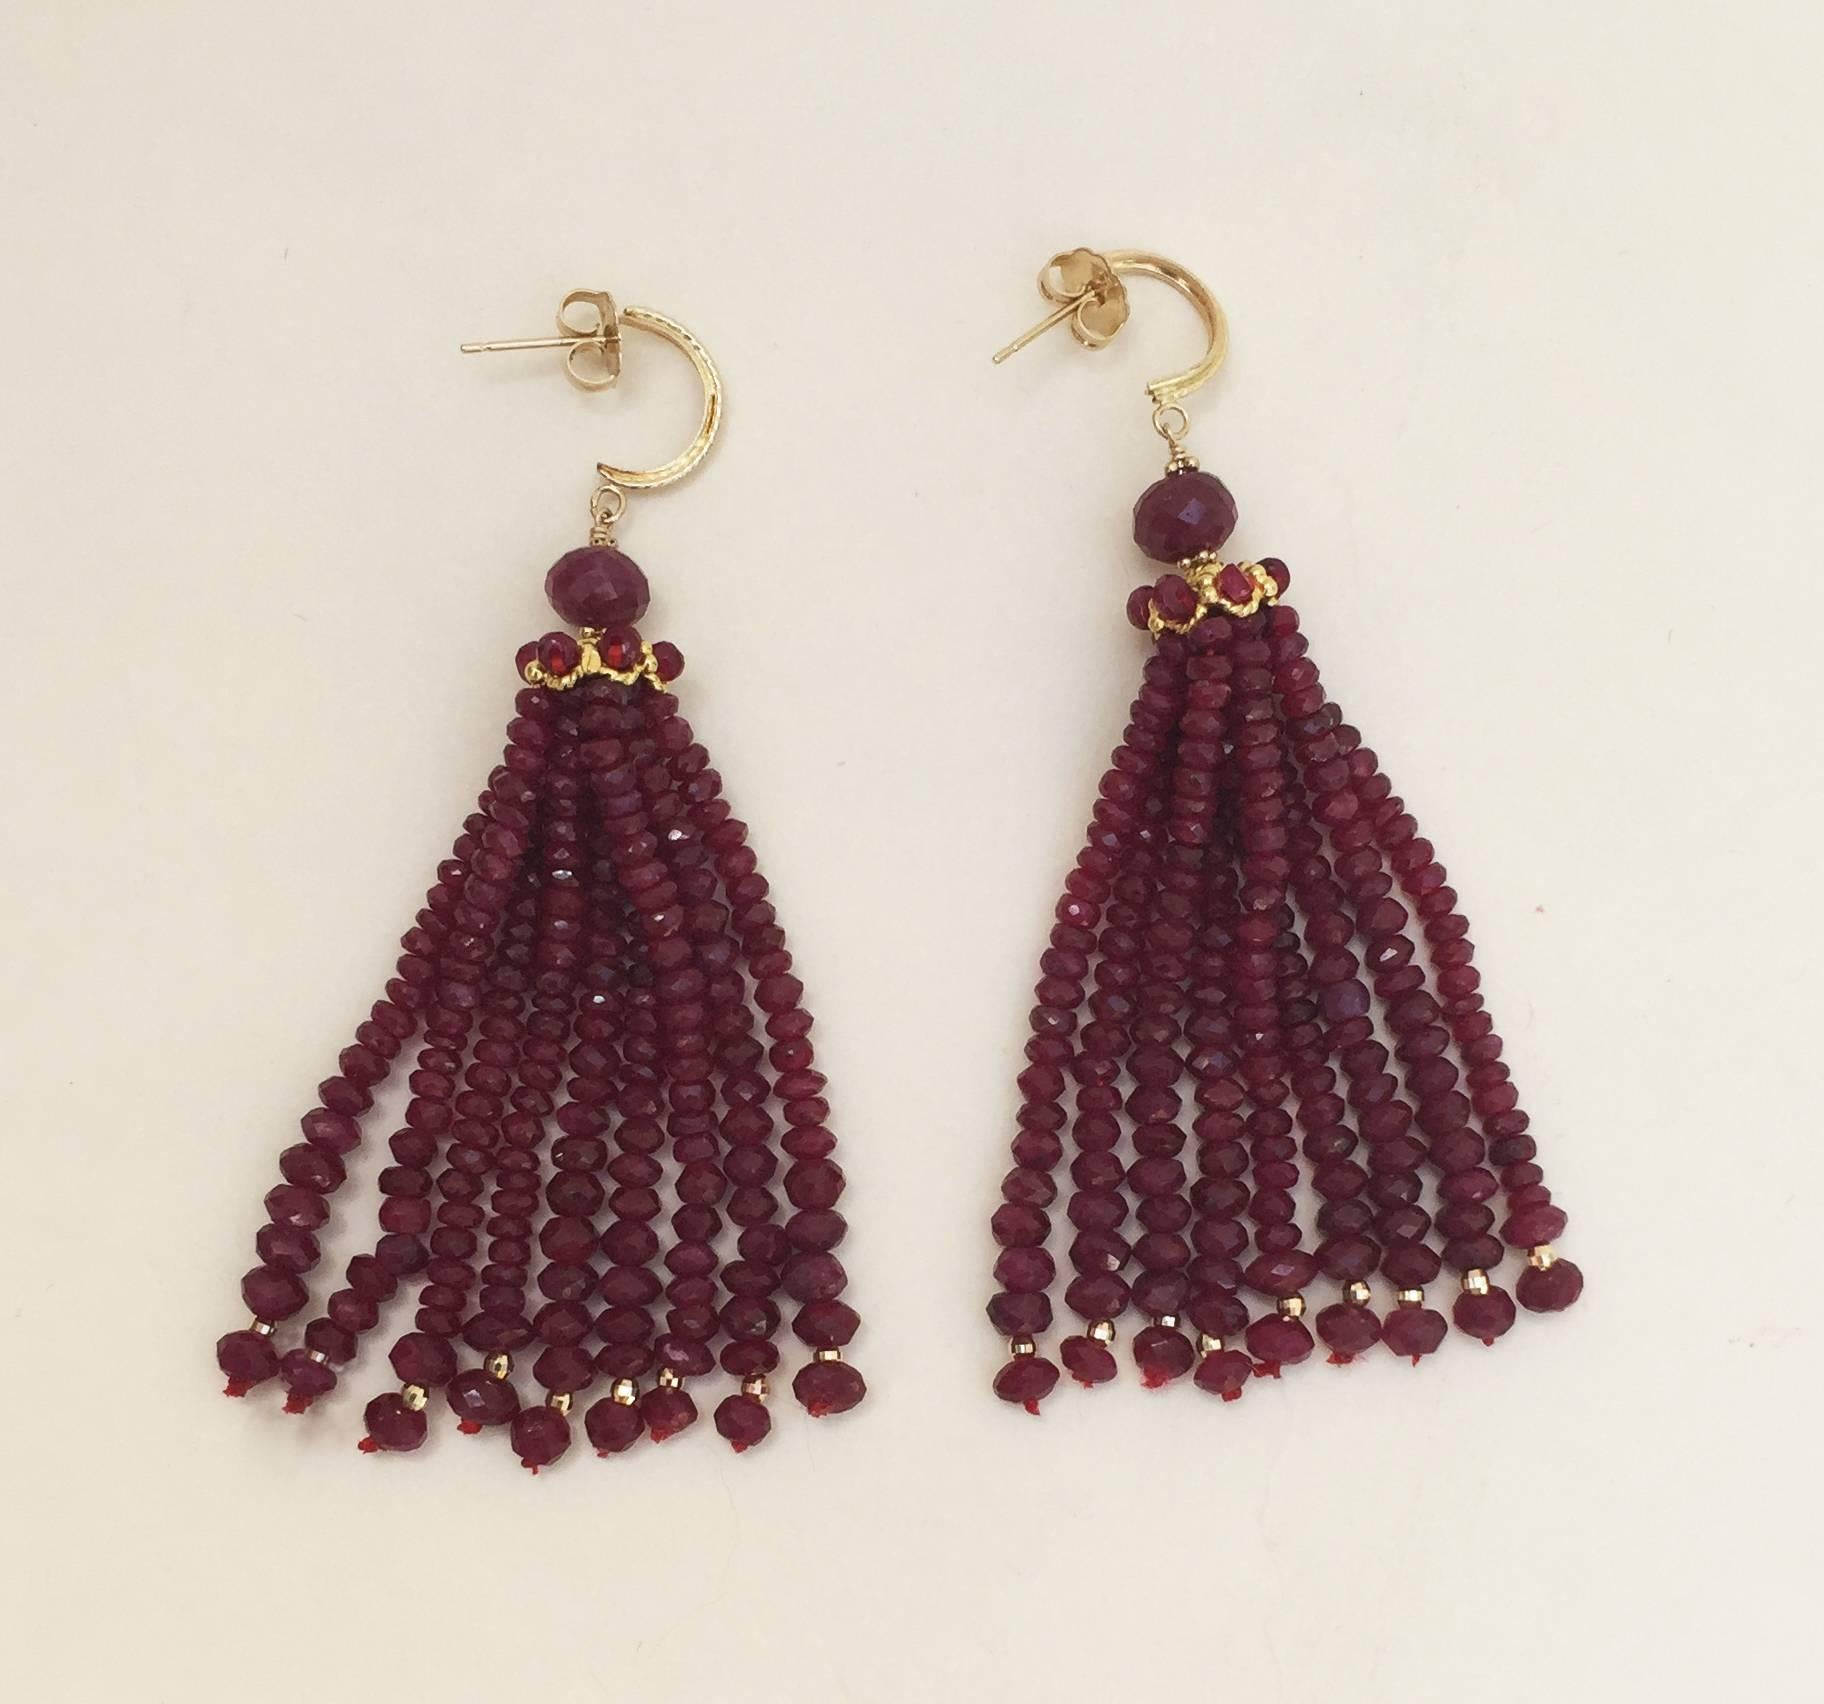 The rich red of the faceted ruby beads are accented by the tiny faceted 14k yellow gold beads at the bottom of each graduated strand (1-3mm). The earrings are almost three inches with a larger ruby faceted bead, 14k yellow gold cap, and stud